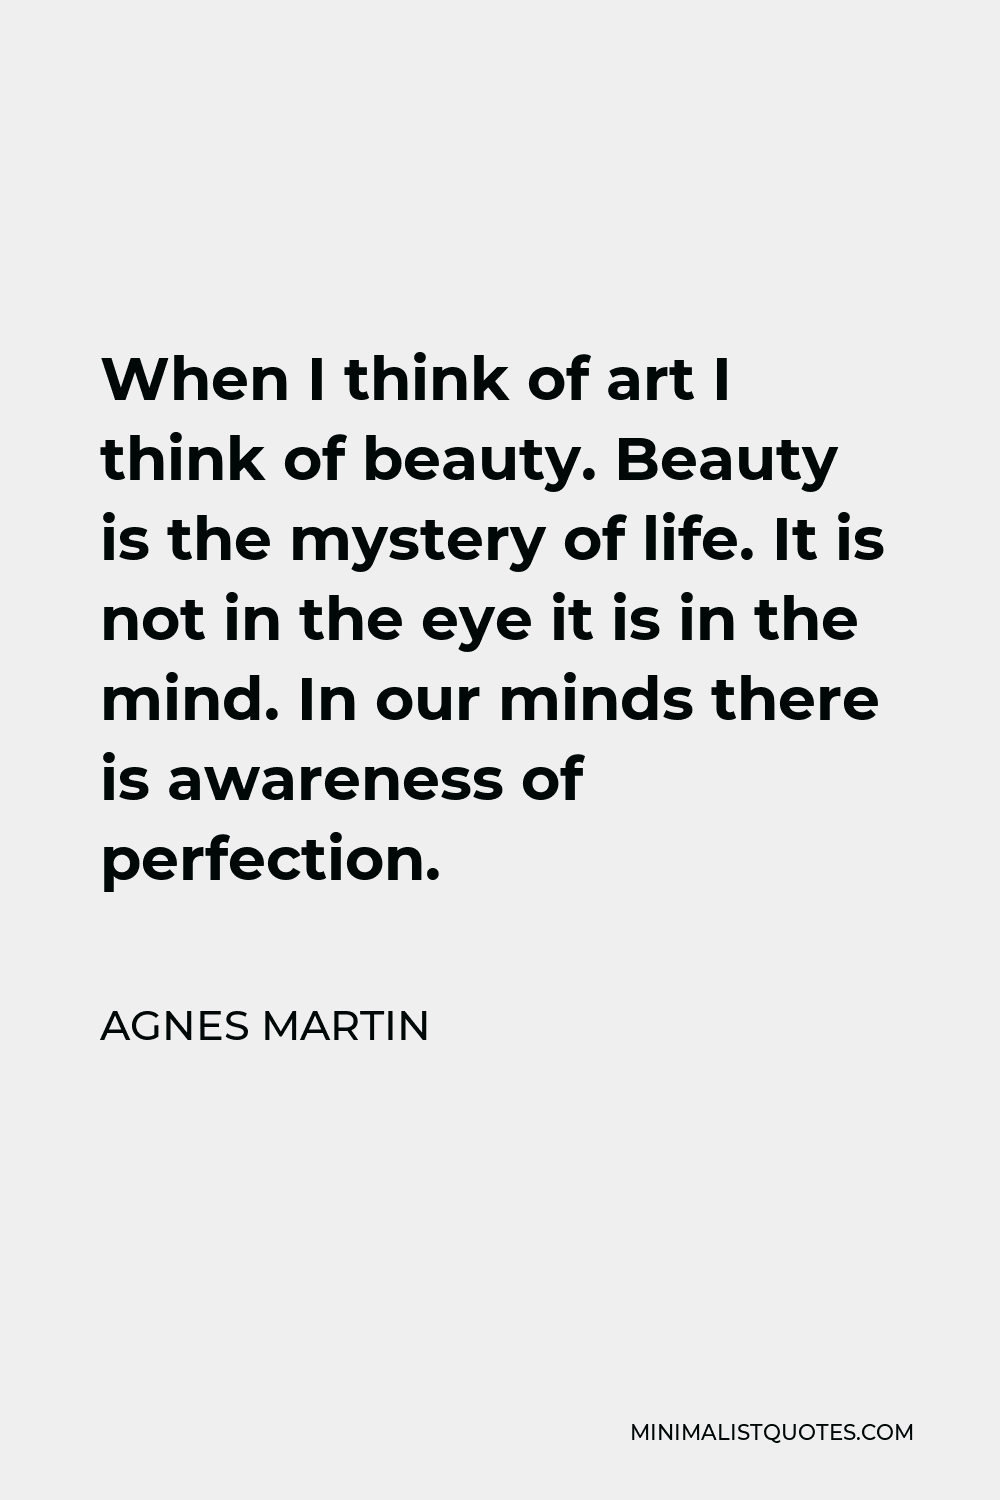 Agnes Martin Quote - When I think of art I think of beauty. Beauty is the mystery of life. It is not in the eye it is in the mind. In our minds there is awareness of perfection.